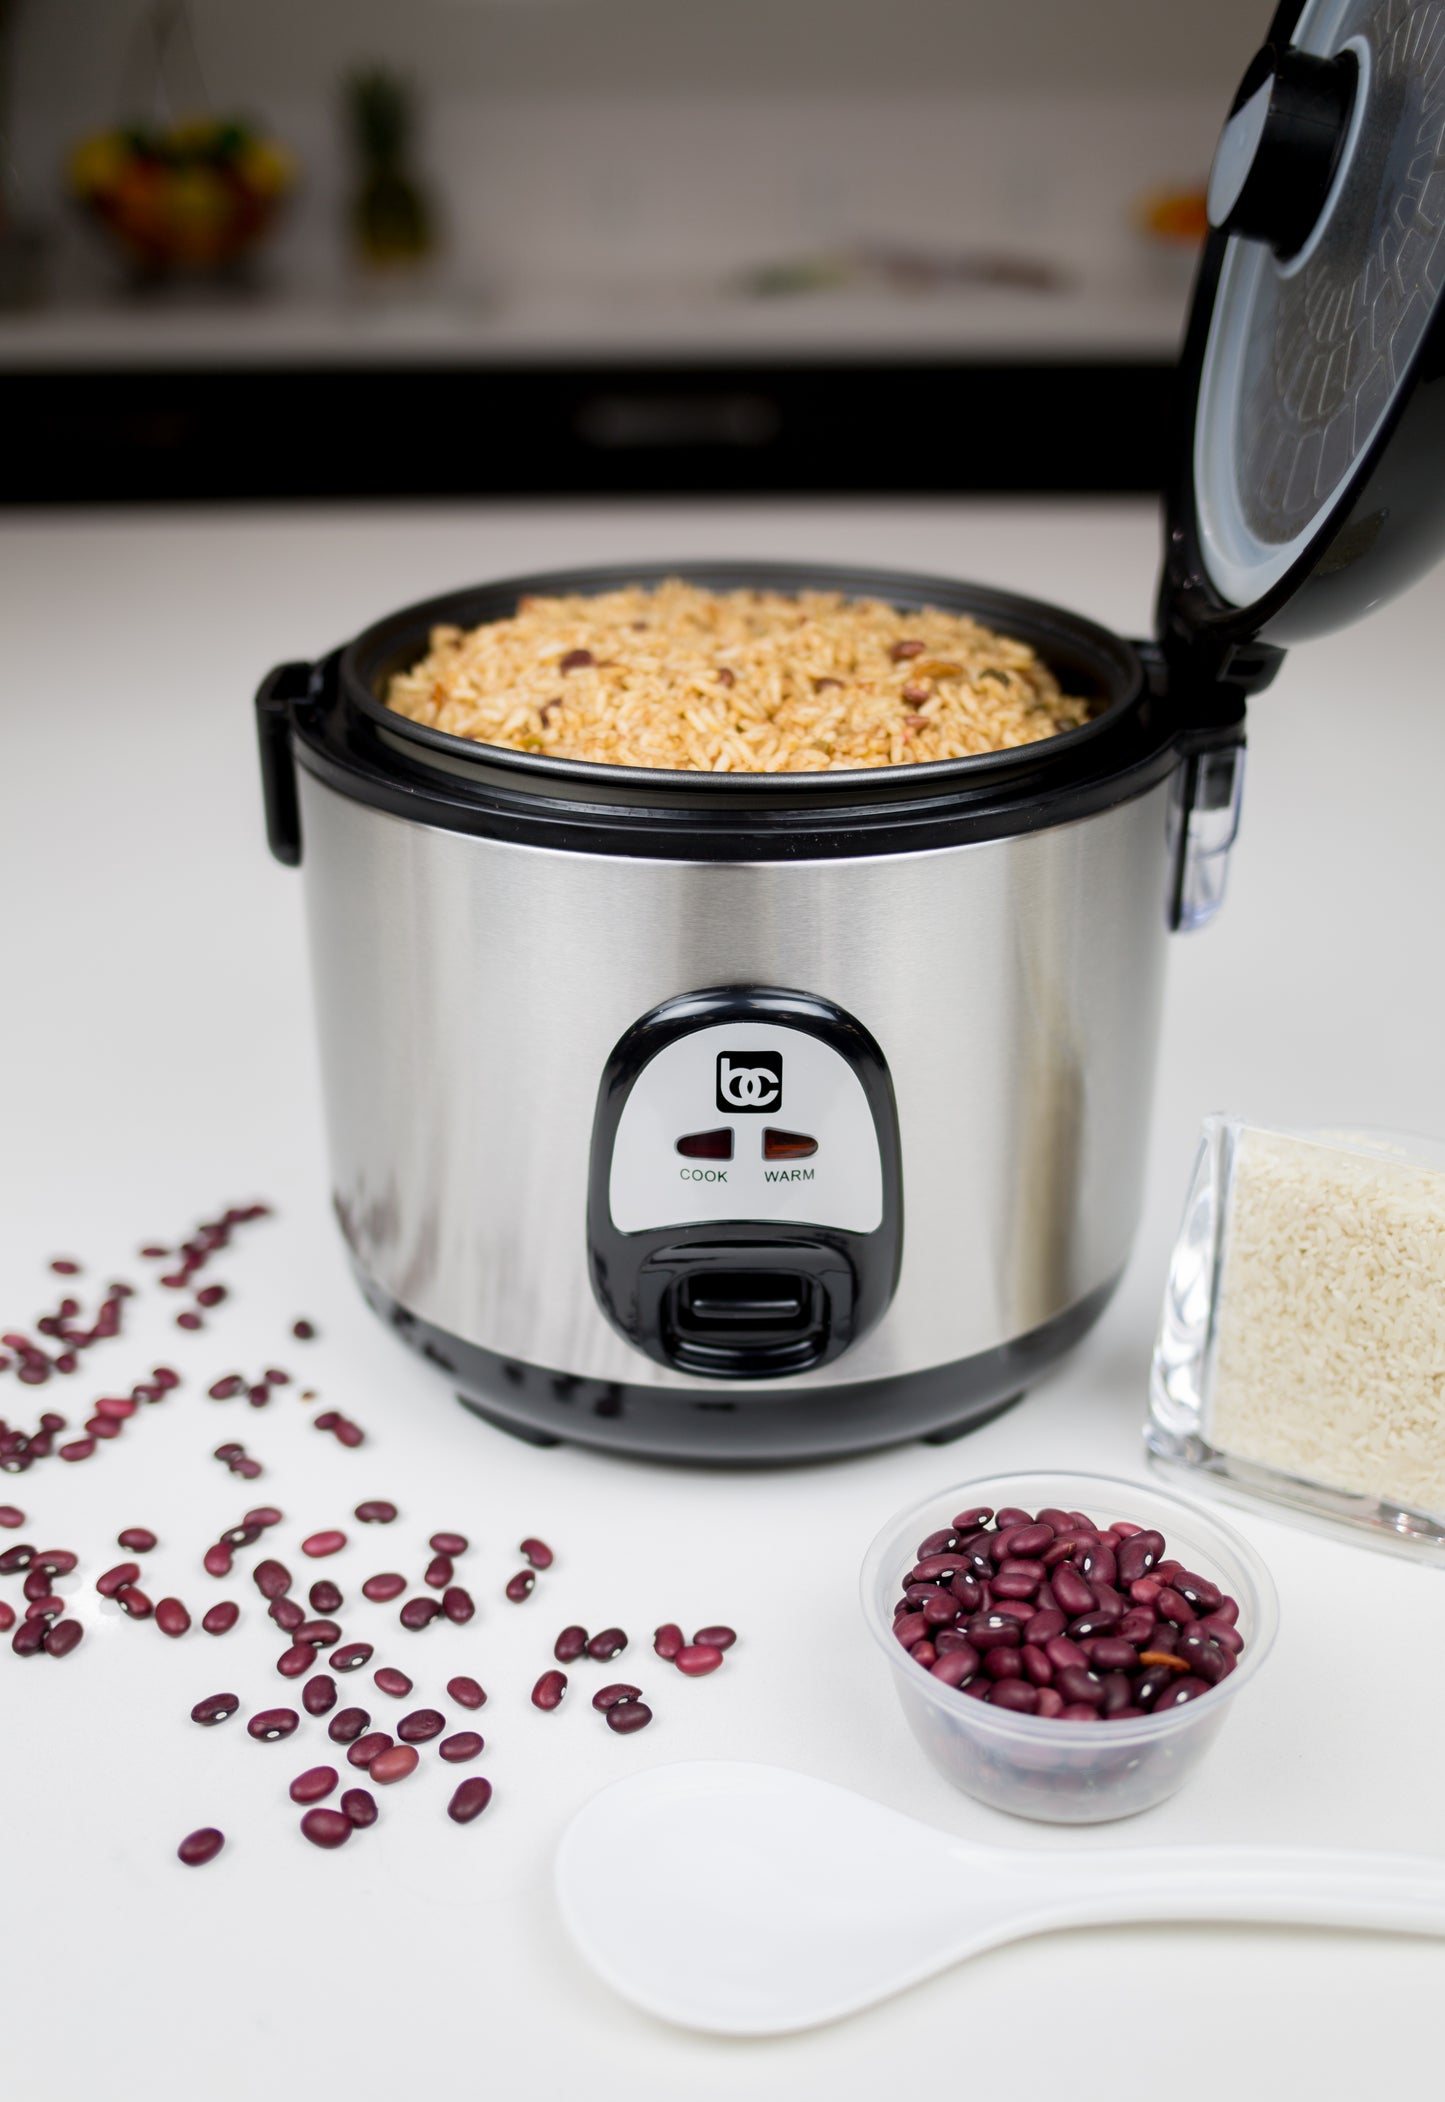 Bene Casa Rice Cooker with glass lid, steamer, auto cut off, keep warm